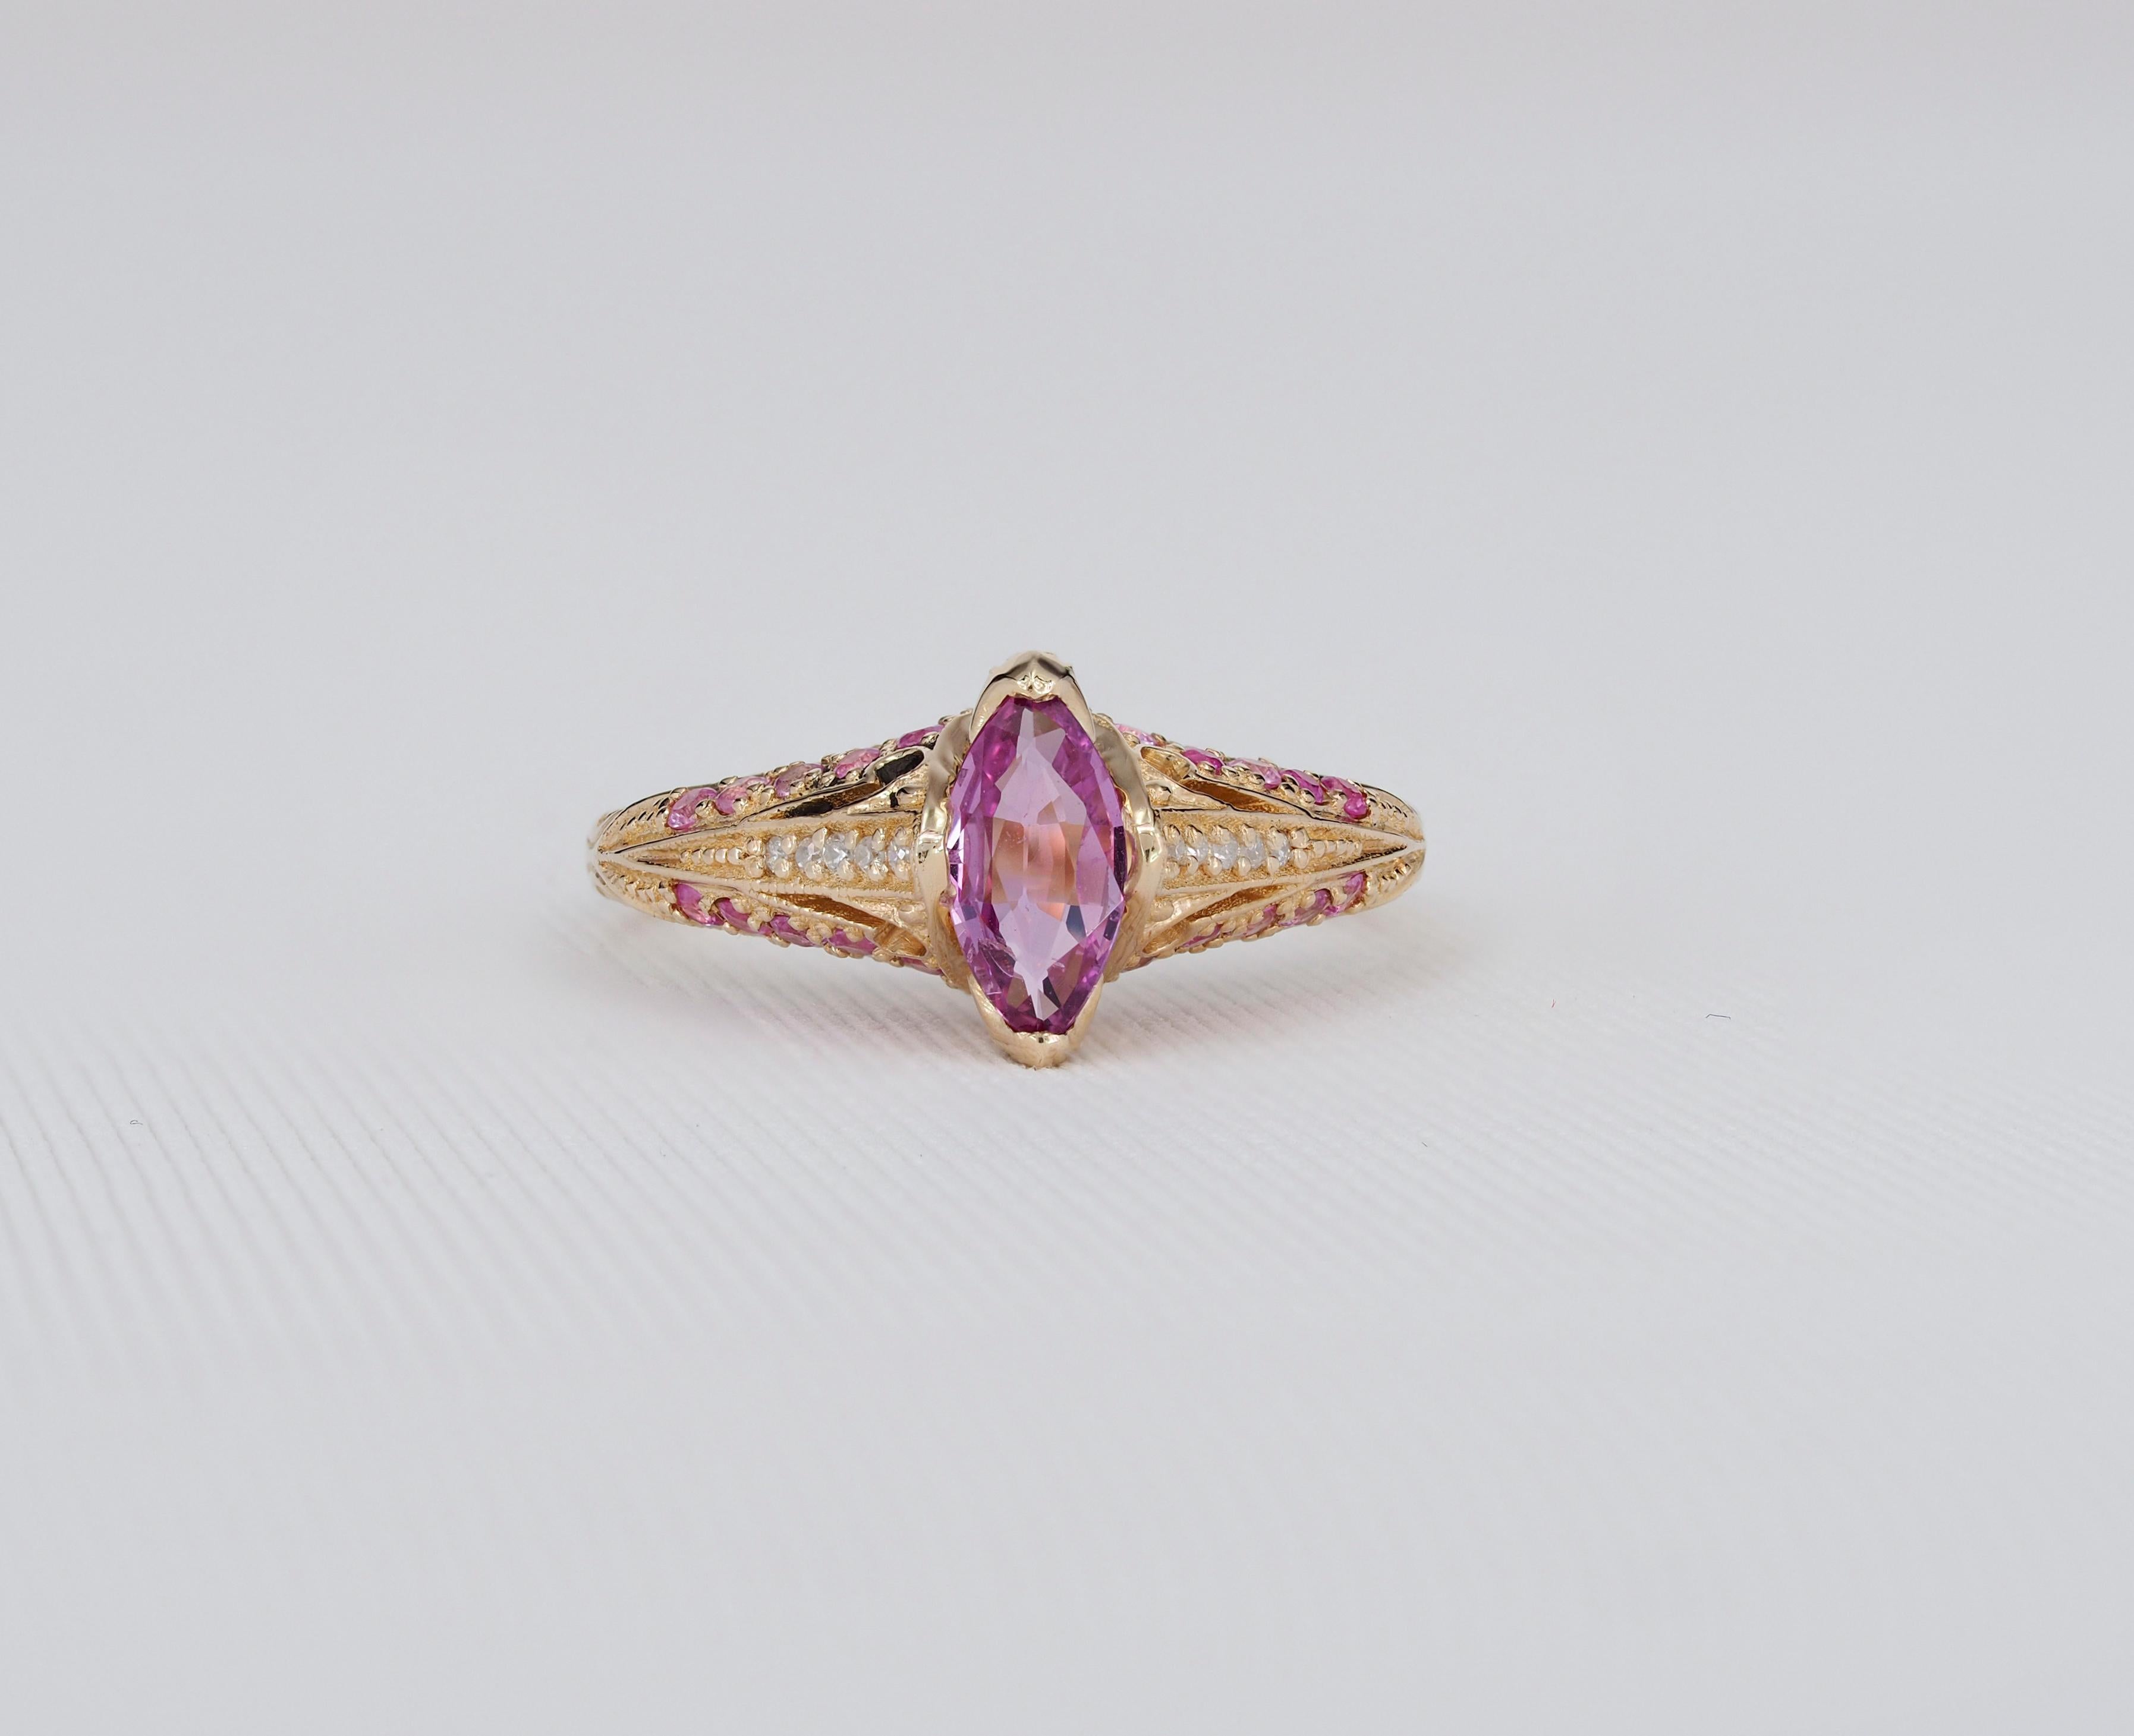 For Sale:  14k gold ring with pink sapphire. Marquise sapphire ring 3